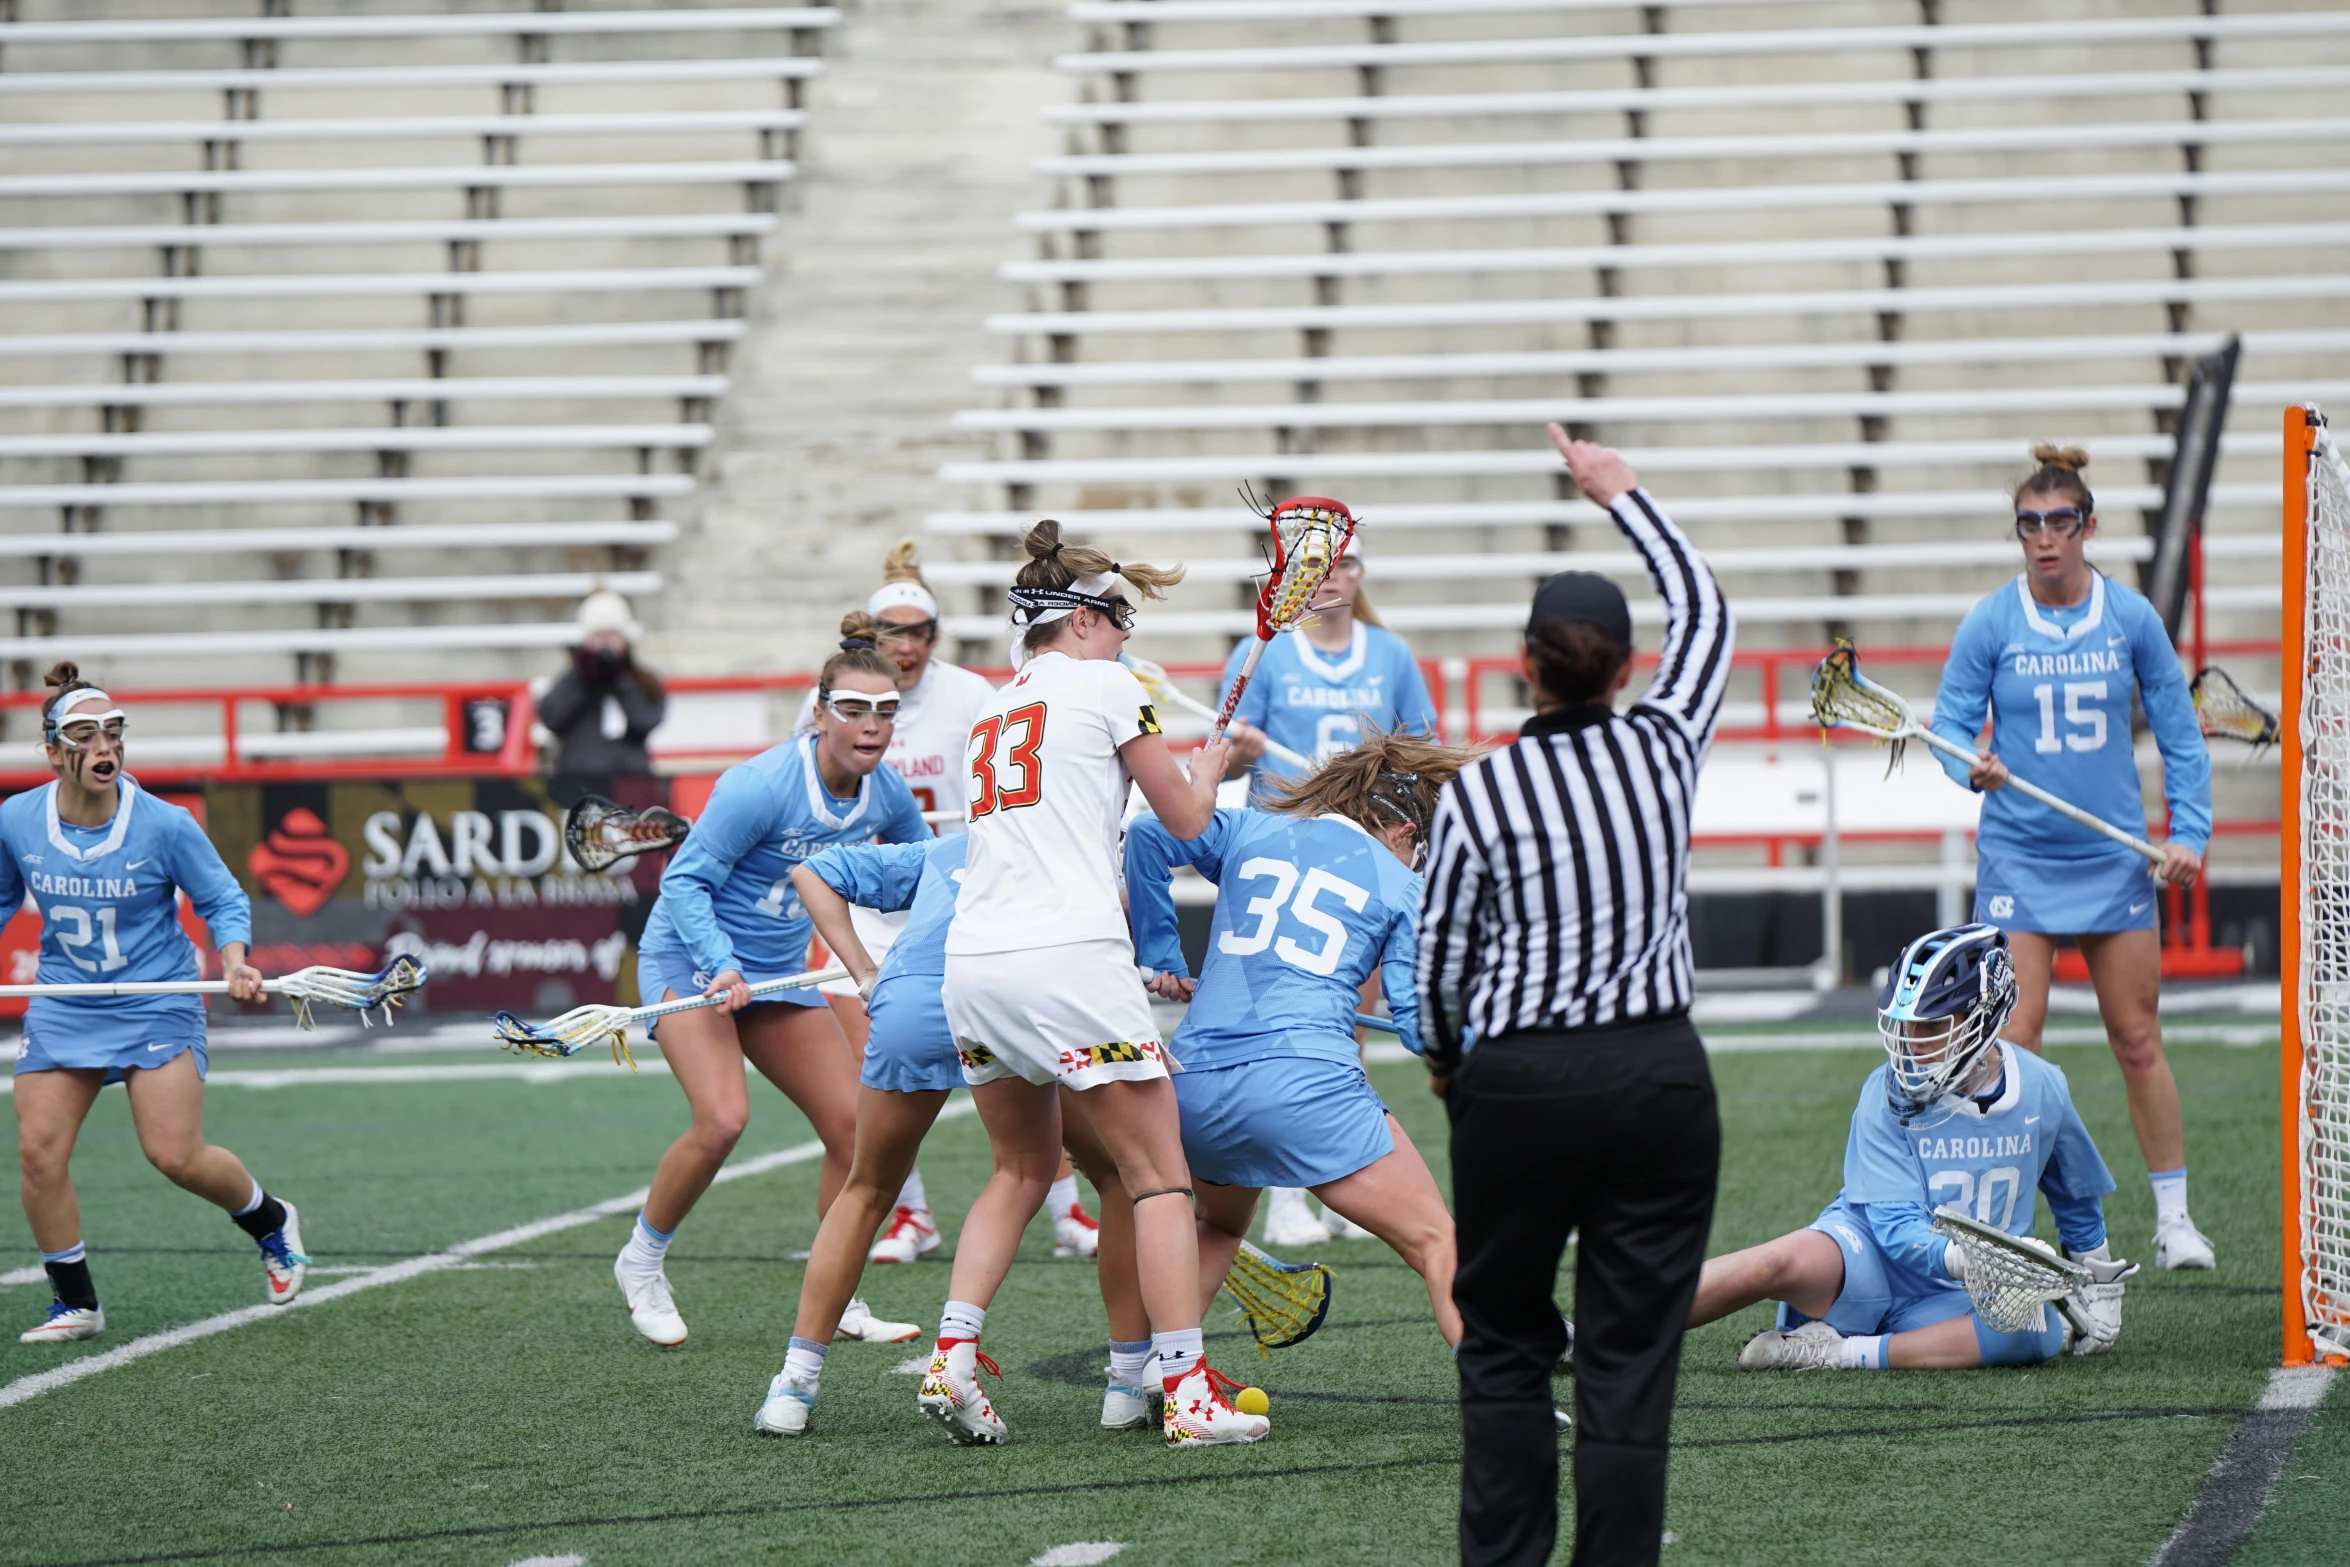 two teams of women compete in the game of lacrosse